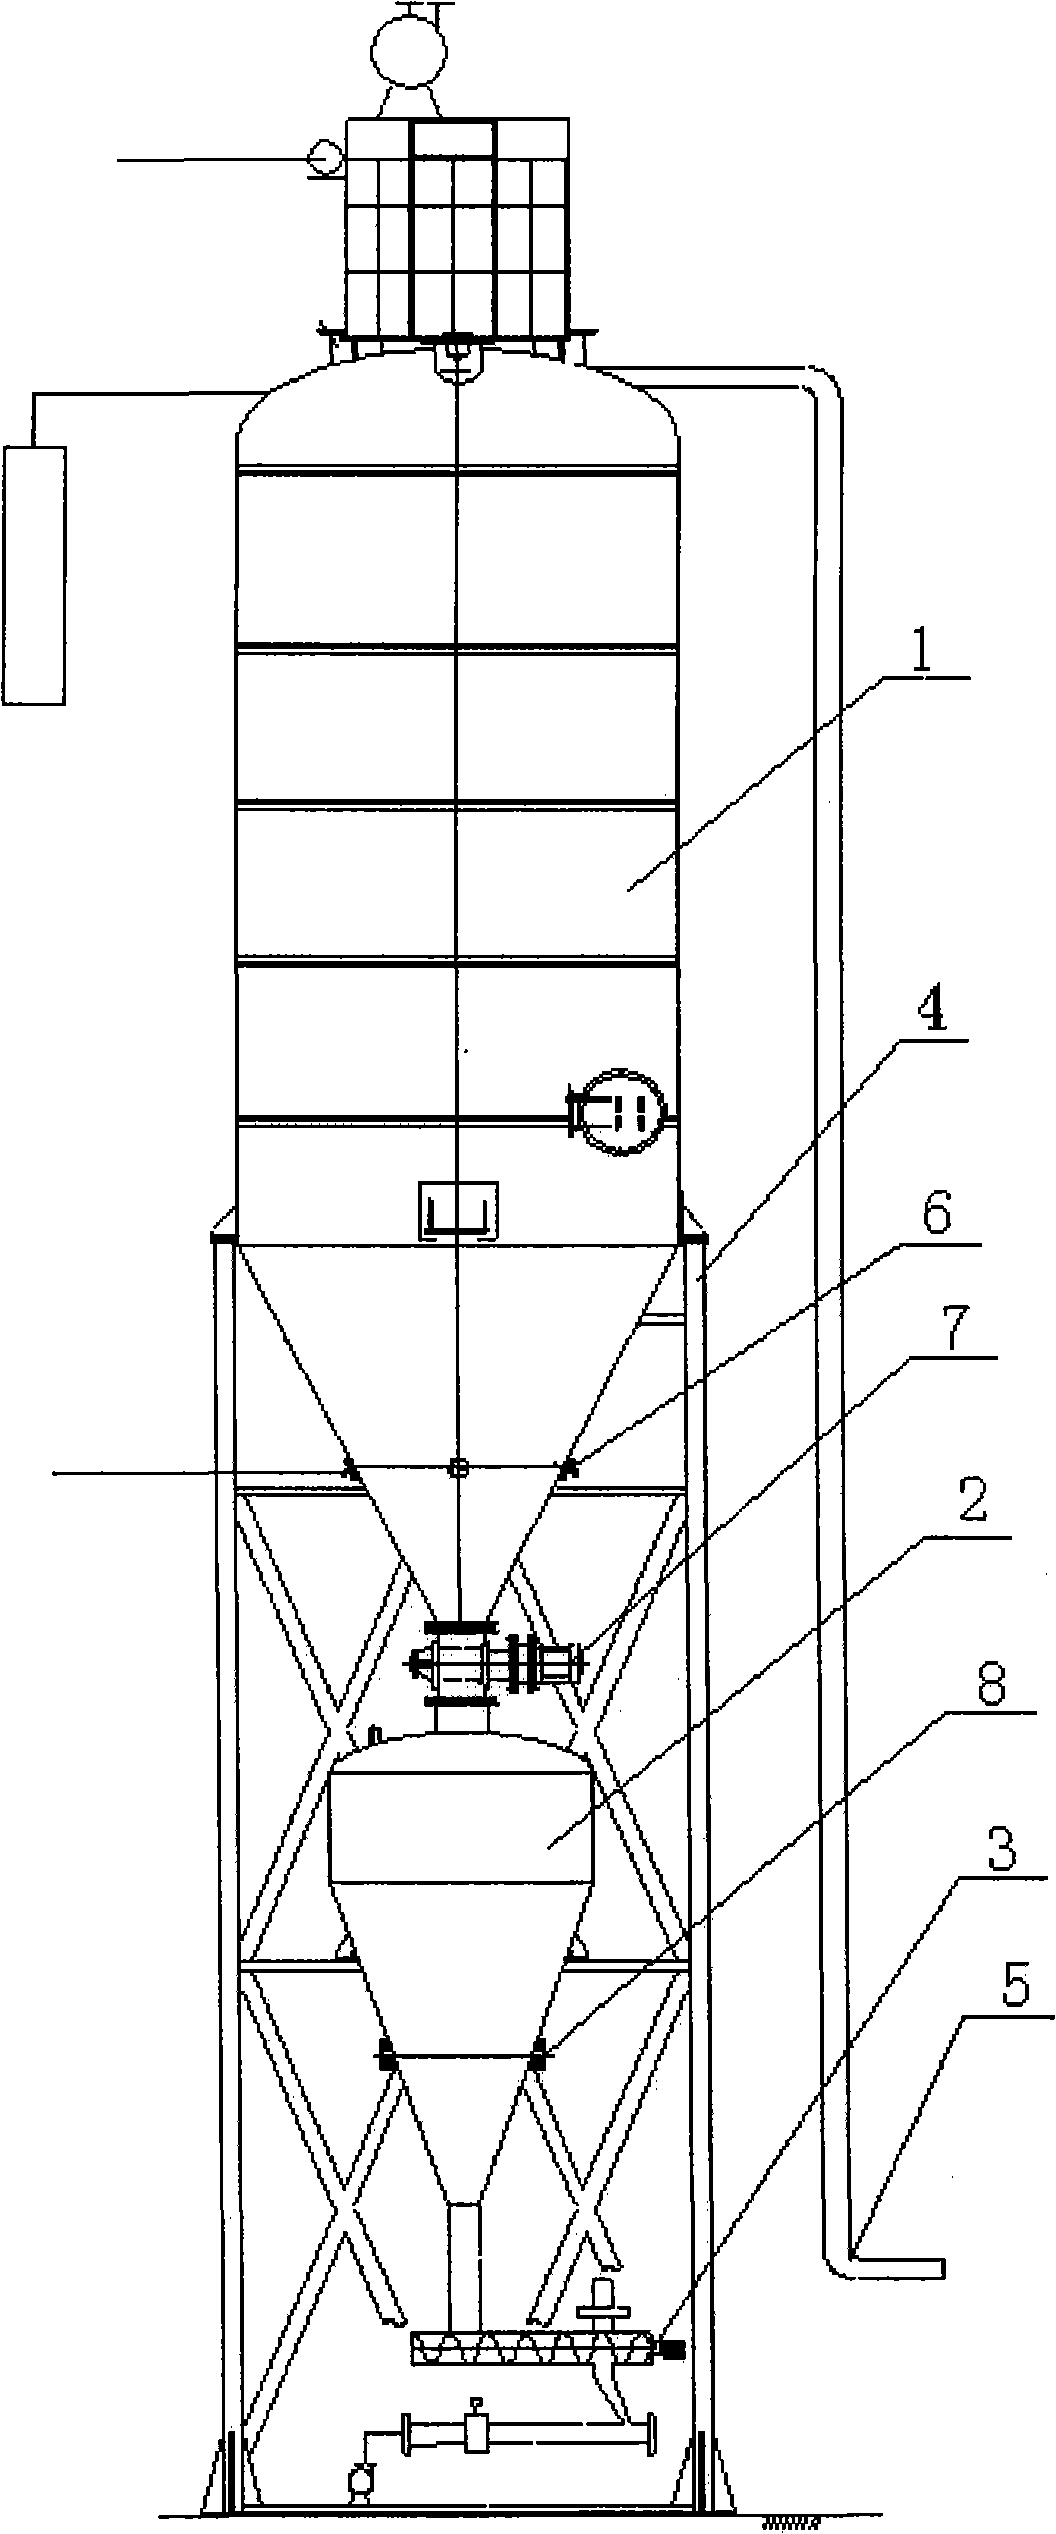 Combined coal powder storage and supply system